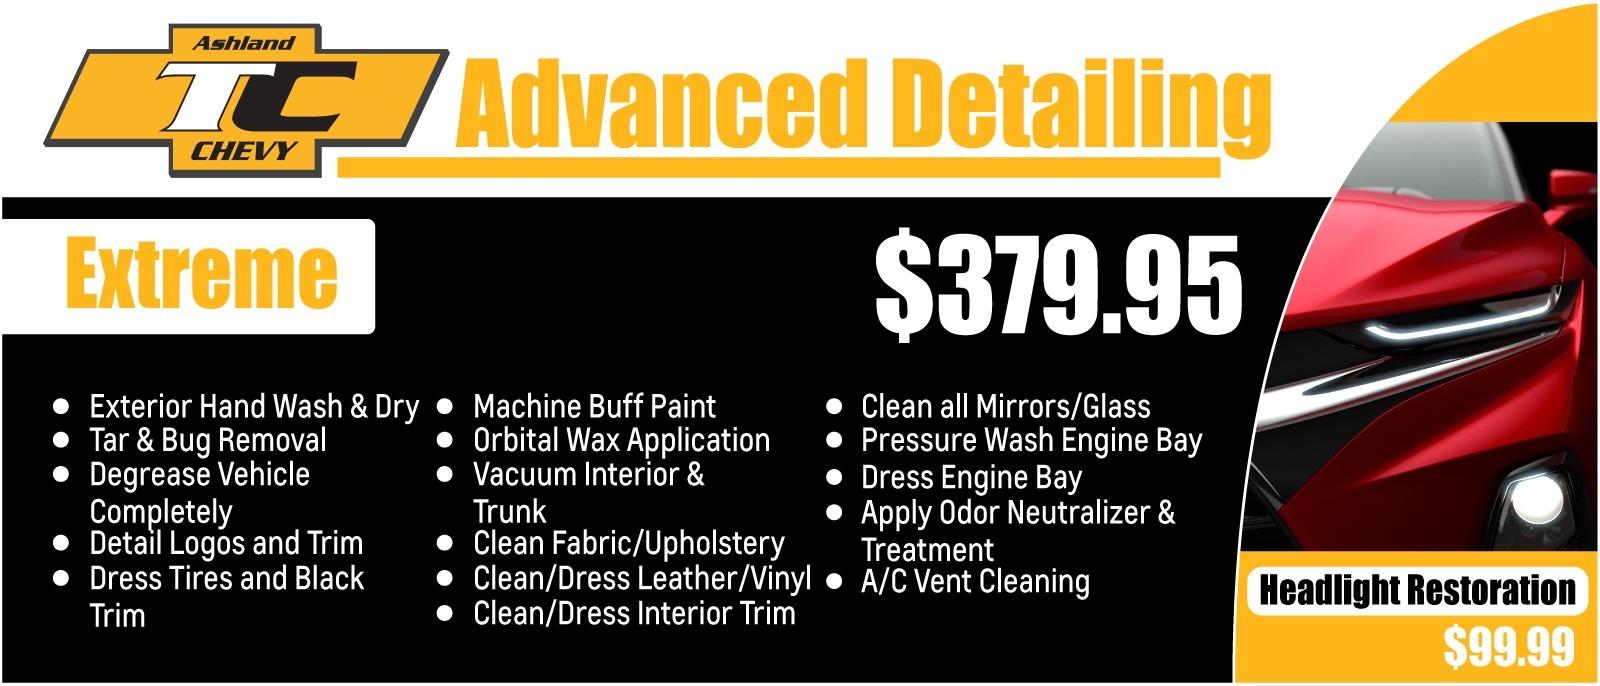 Advanced Detailing Extreme $379.95